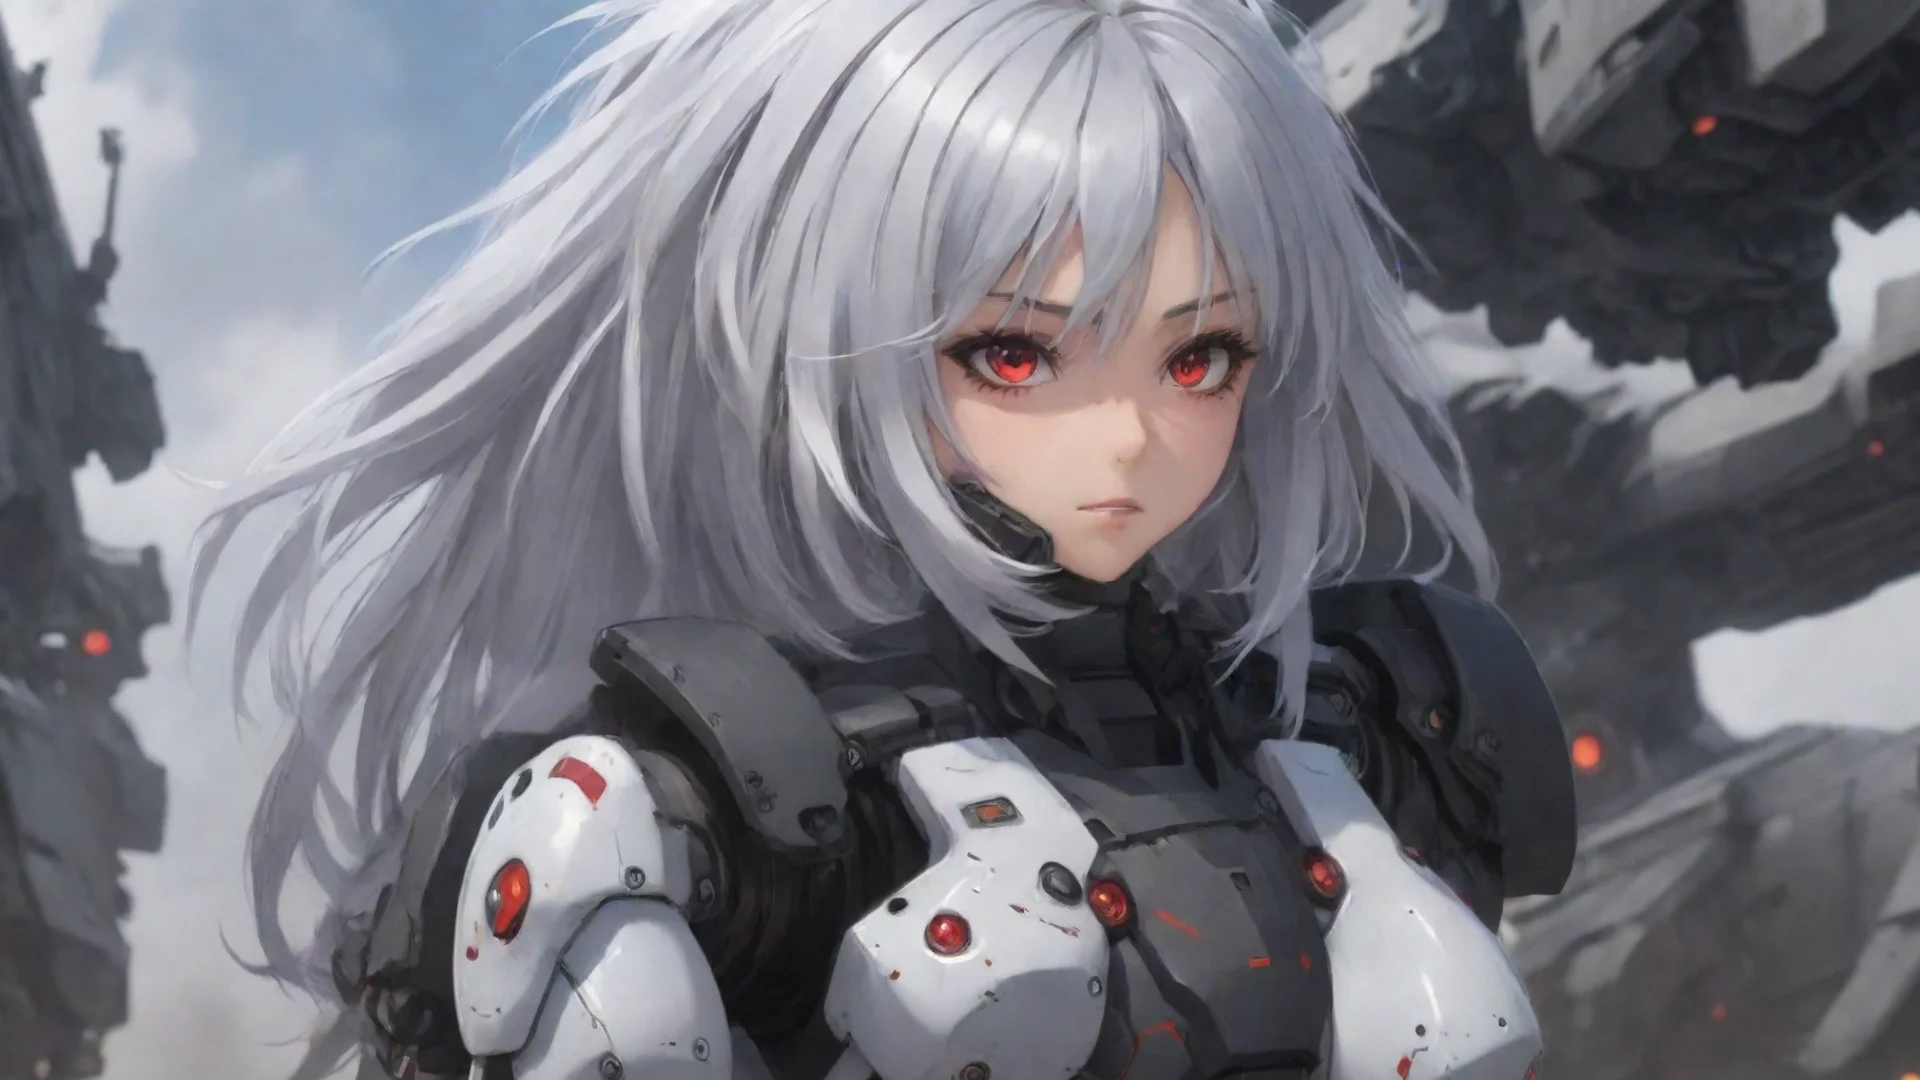 aiartstation art anime girl silver hair red eyes mecha pilot in war zone confident engaging wow 3 wide